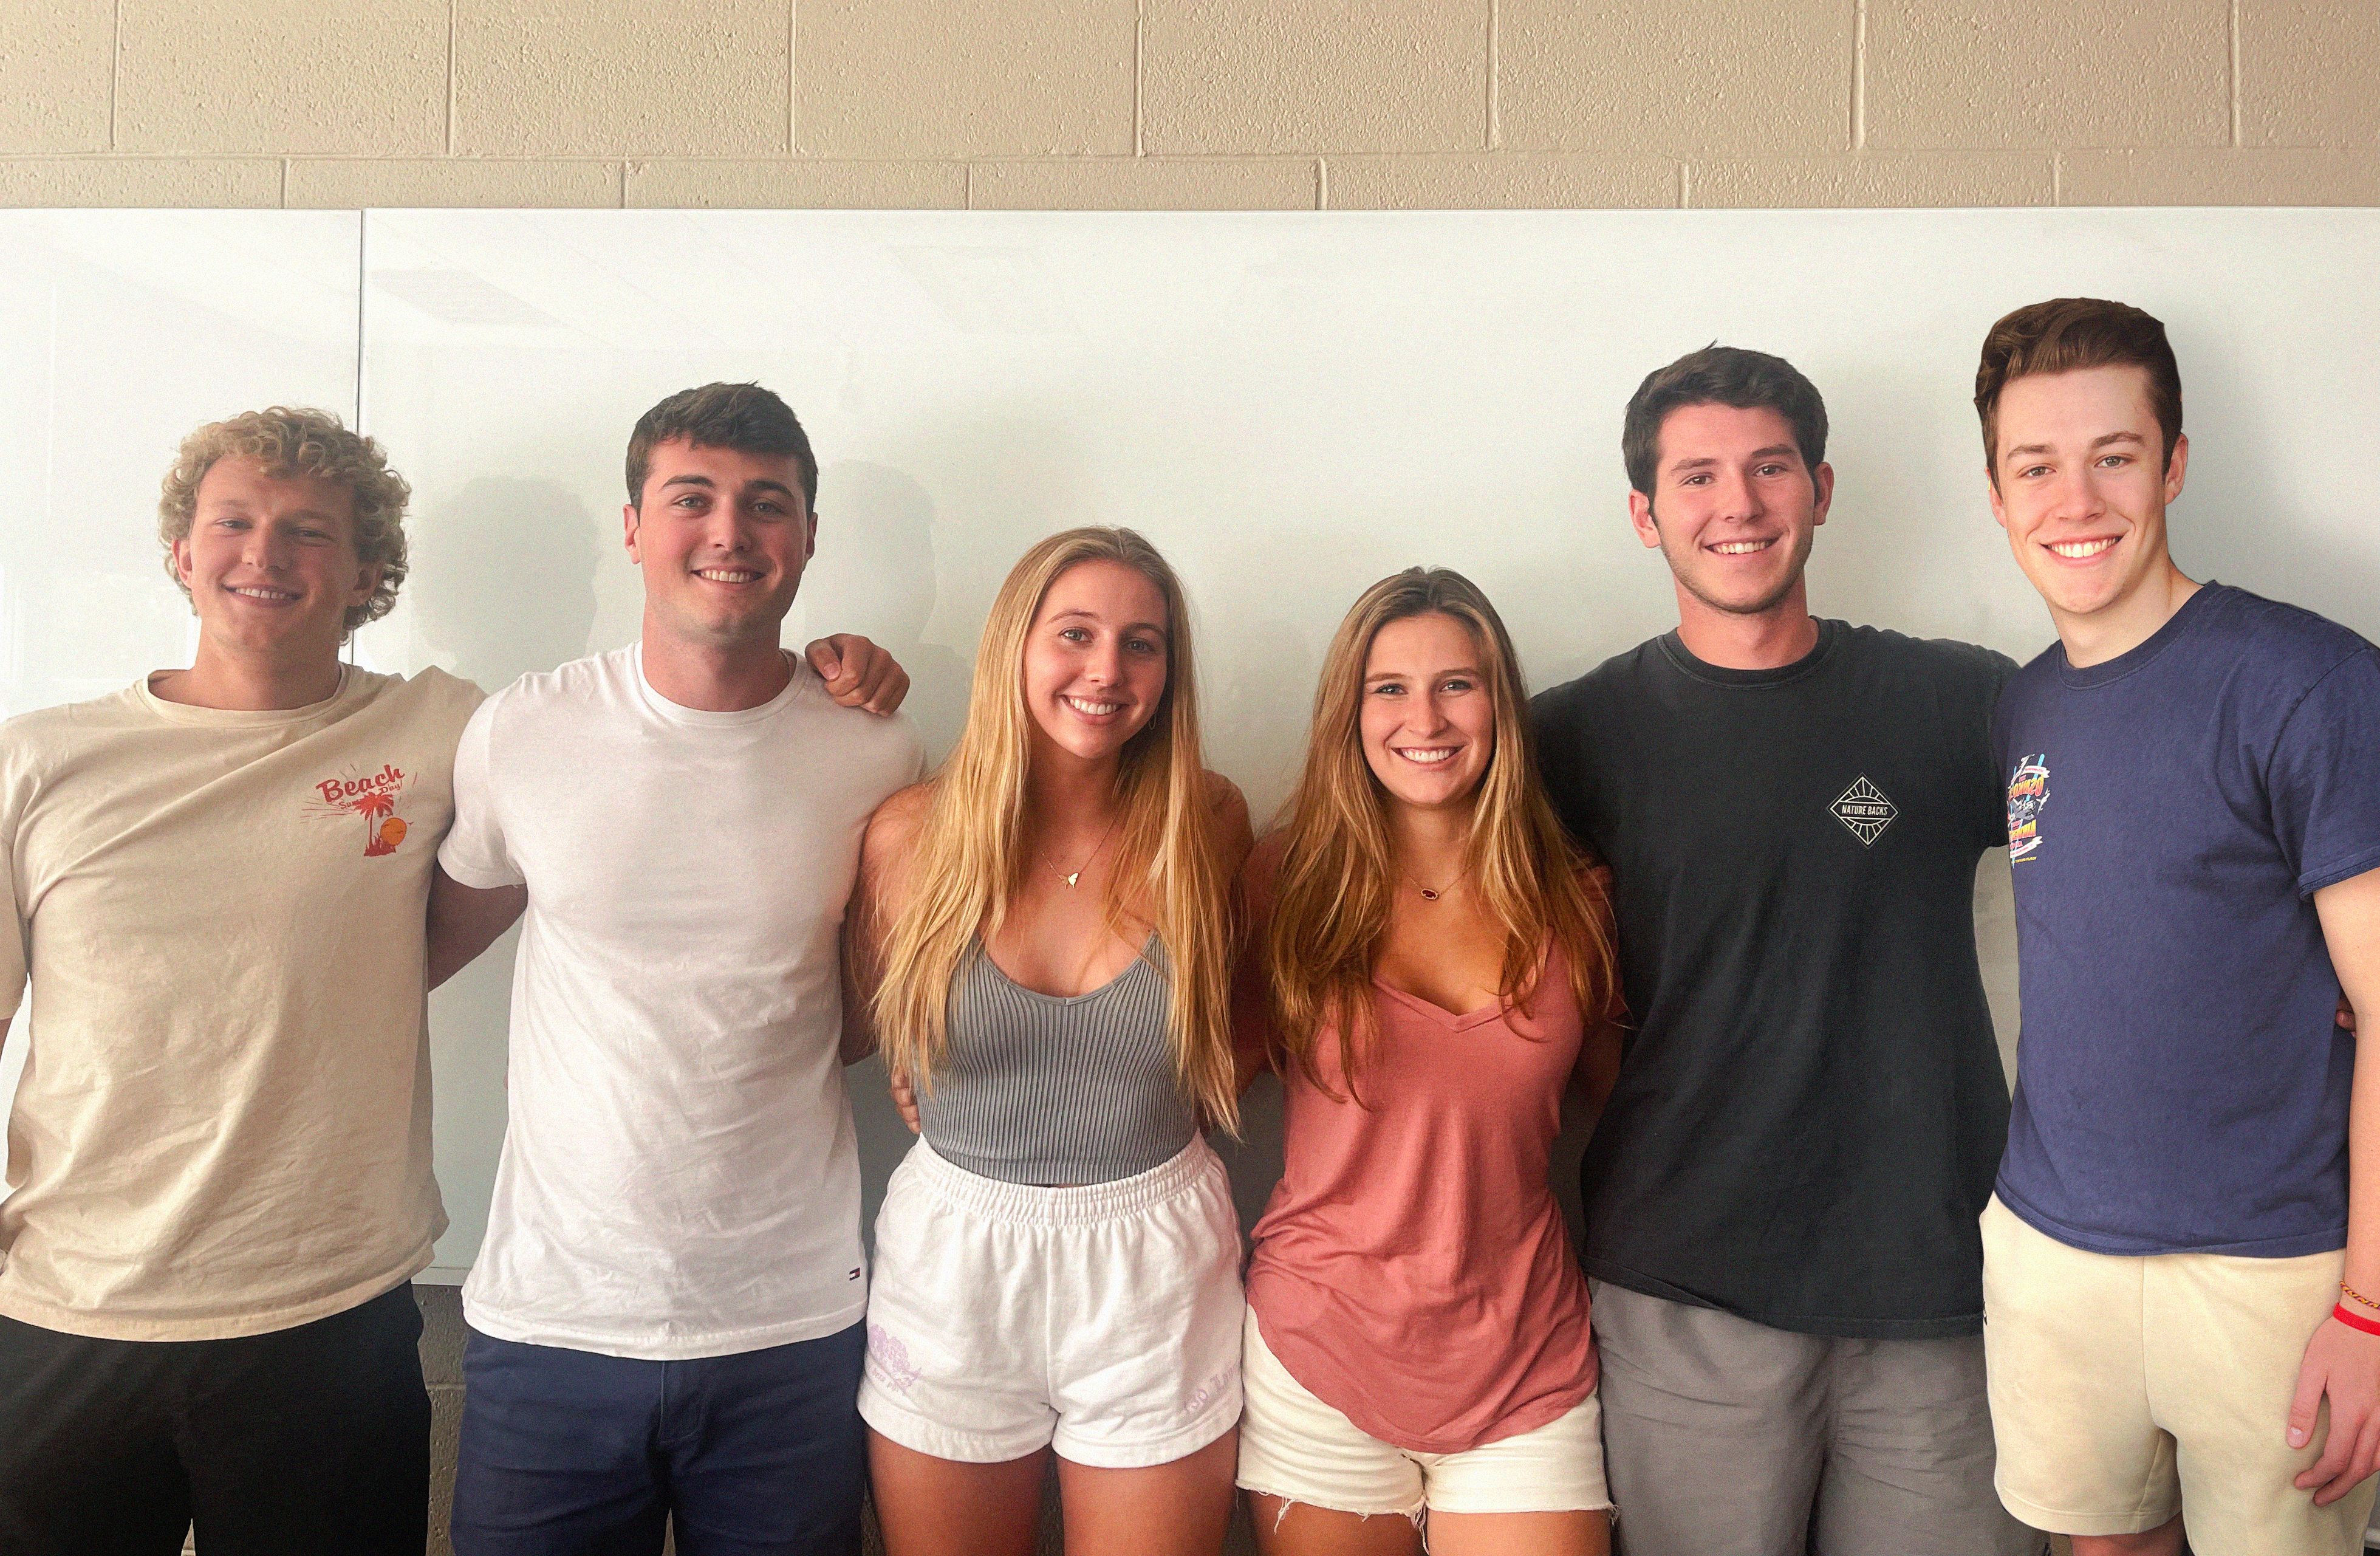 Our team (from left to right): Caelen Nickel (BPAG), Colin Fessenden (Co-BWIG), Eva Coughlin (Communicator), Jenna Krause (Team Leader), Tevis Linser (BSAC), Tommy Kriewaldt (Co-BWIG)